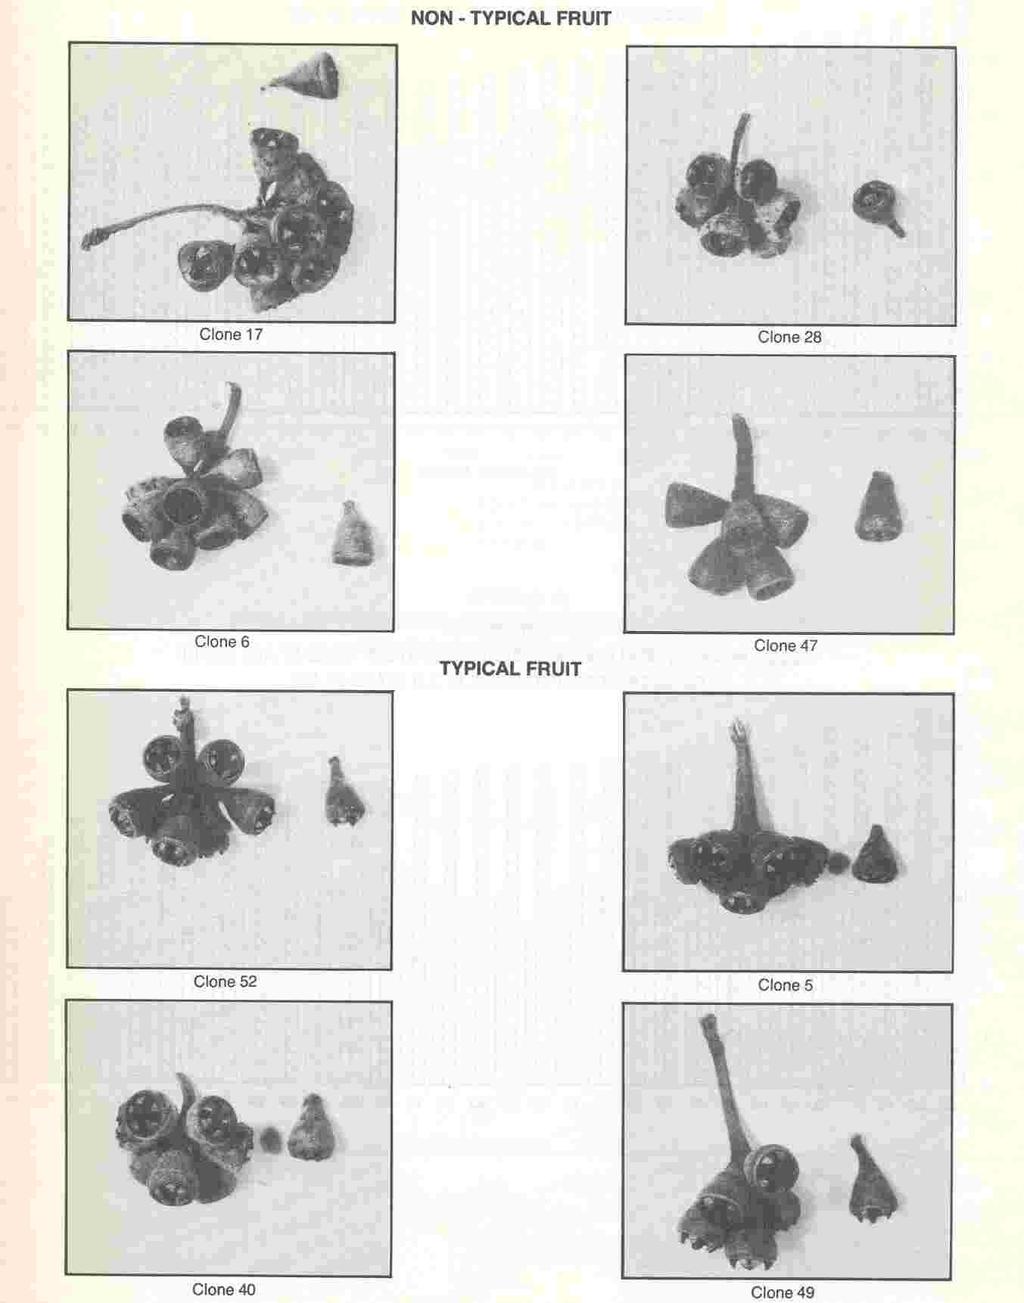 APPENDIX II Photographs of typical and non-typical fruits of some clones from the